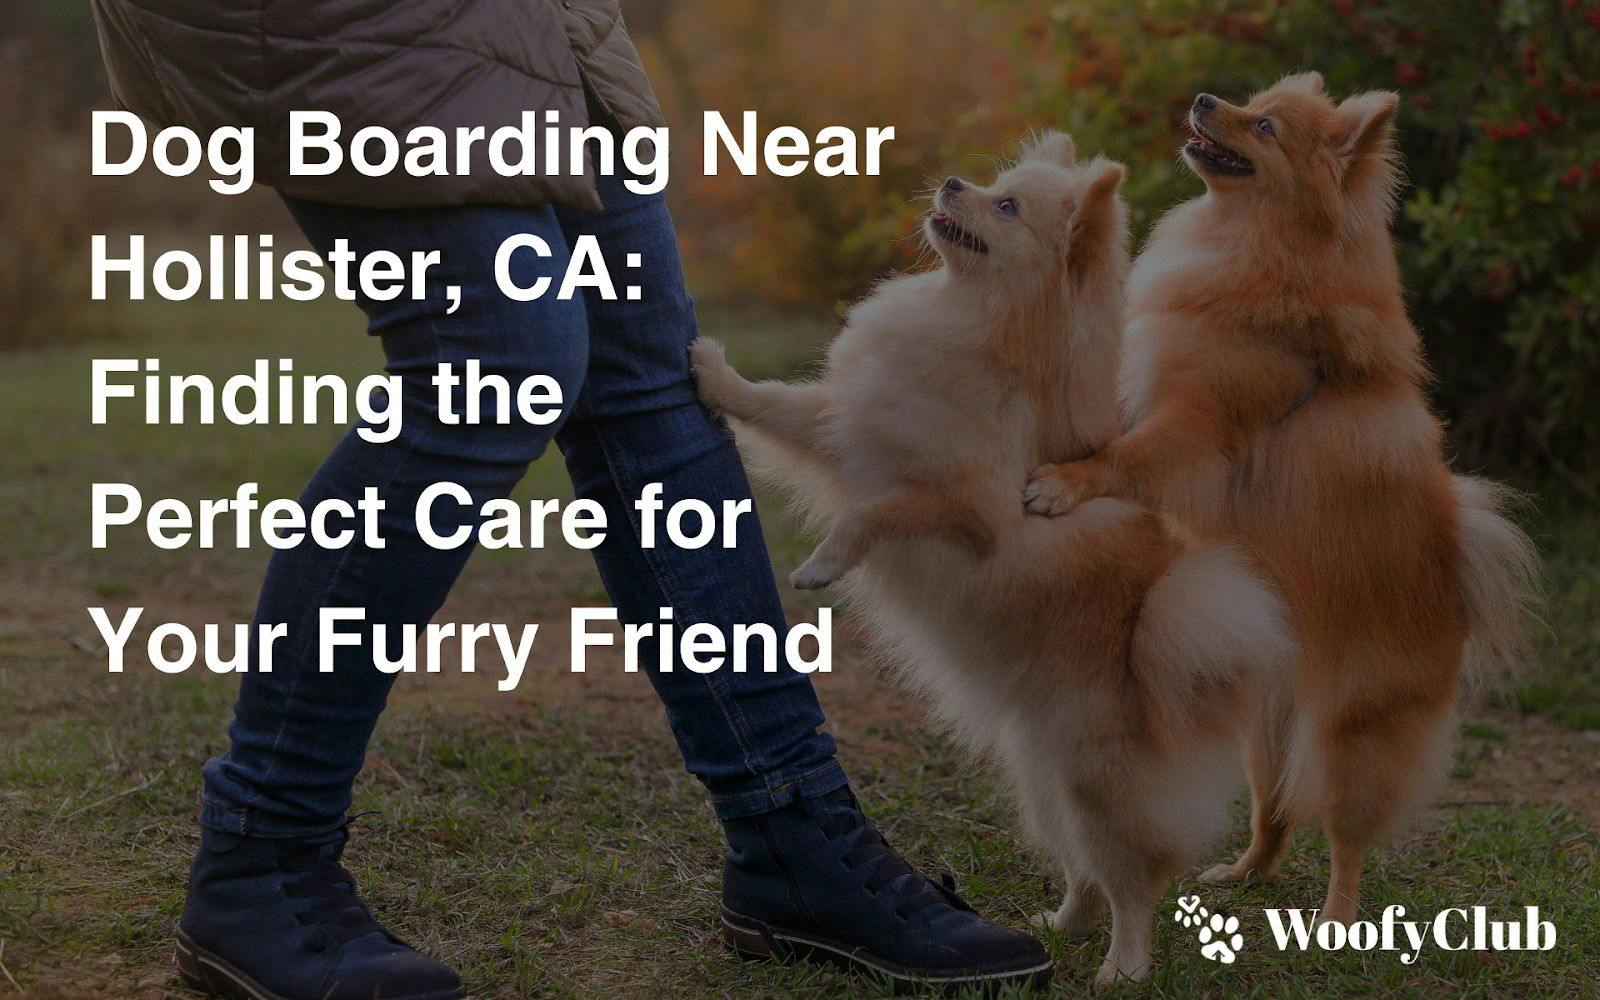 Dog Boarding Near Hollister, CA: Finding The Perfect Care For Your Furry Friend